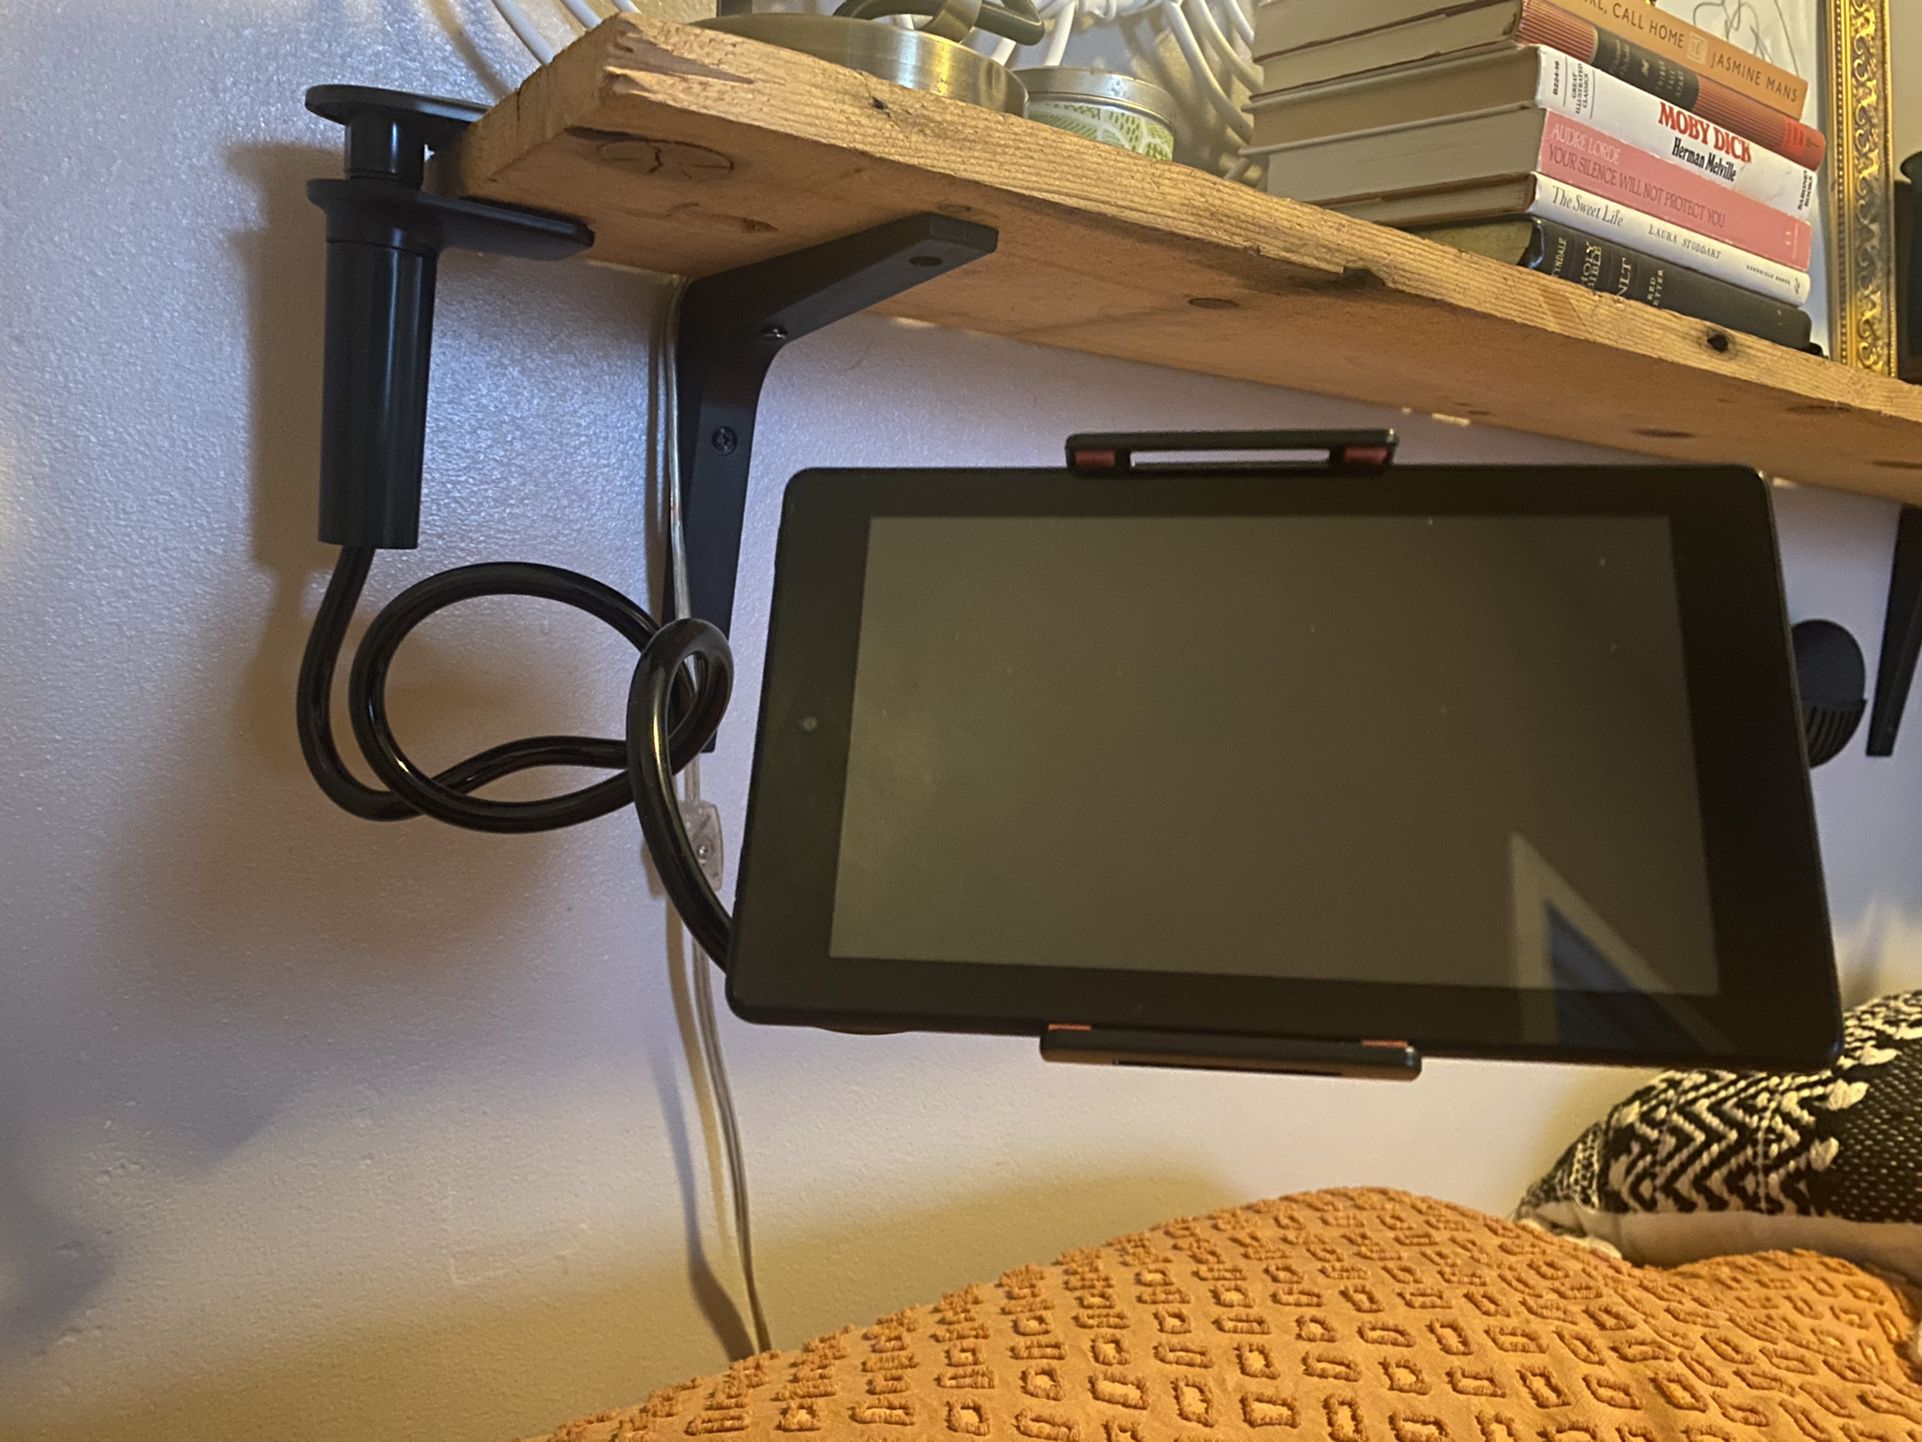 Amazon fire 7” 2021 + Stand 